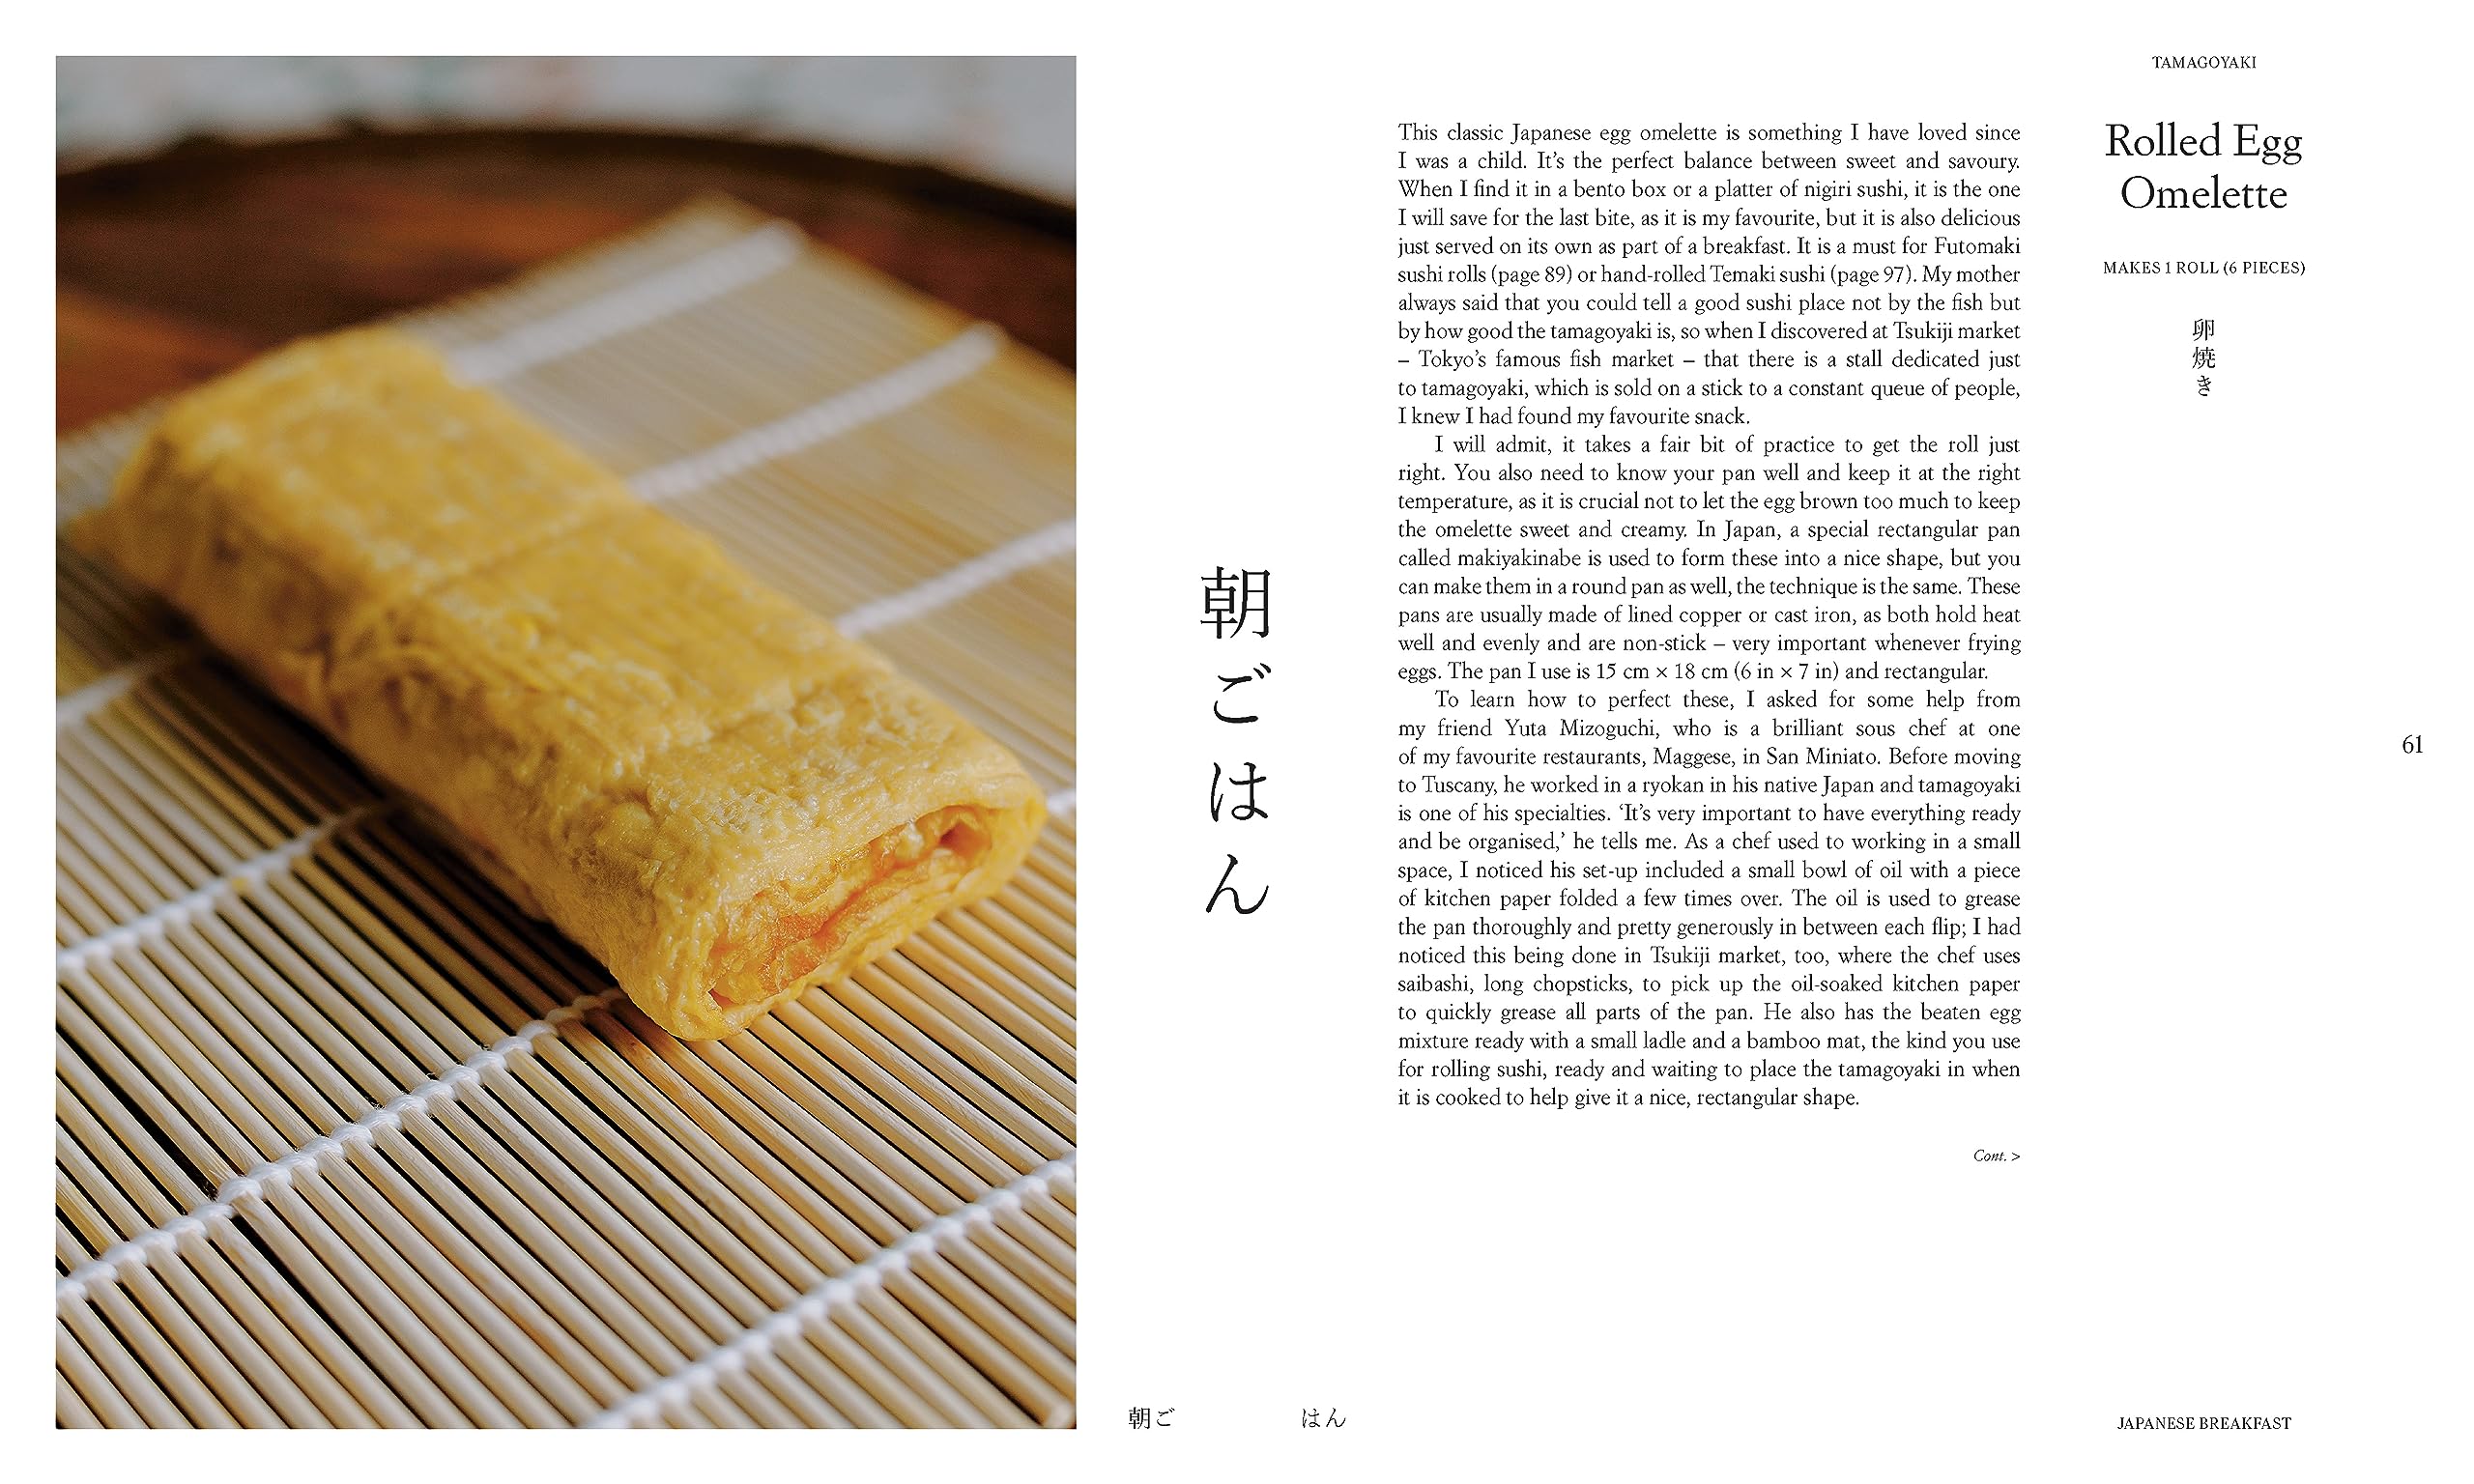 Gohan: Everyday Japanese Cooking: Memories and Stories from My Family's Kitchen (Emiko Davies)